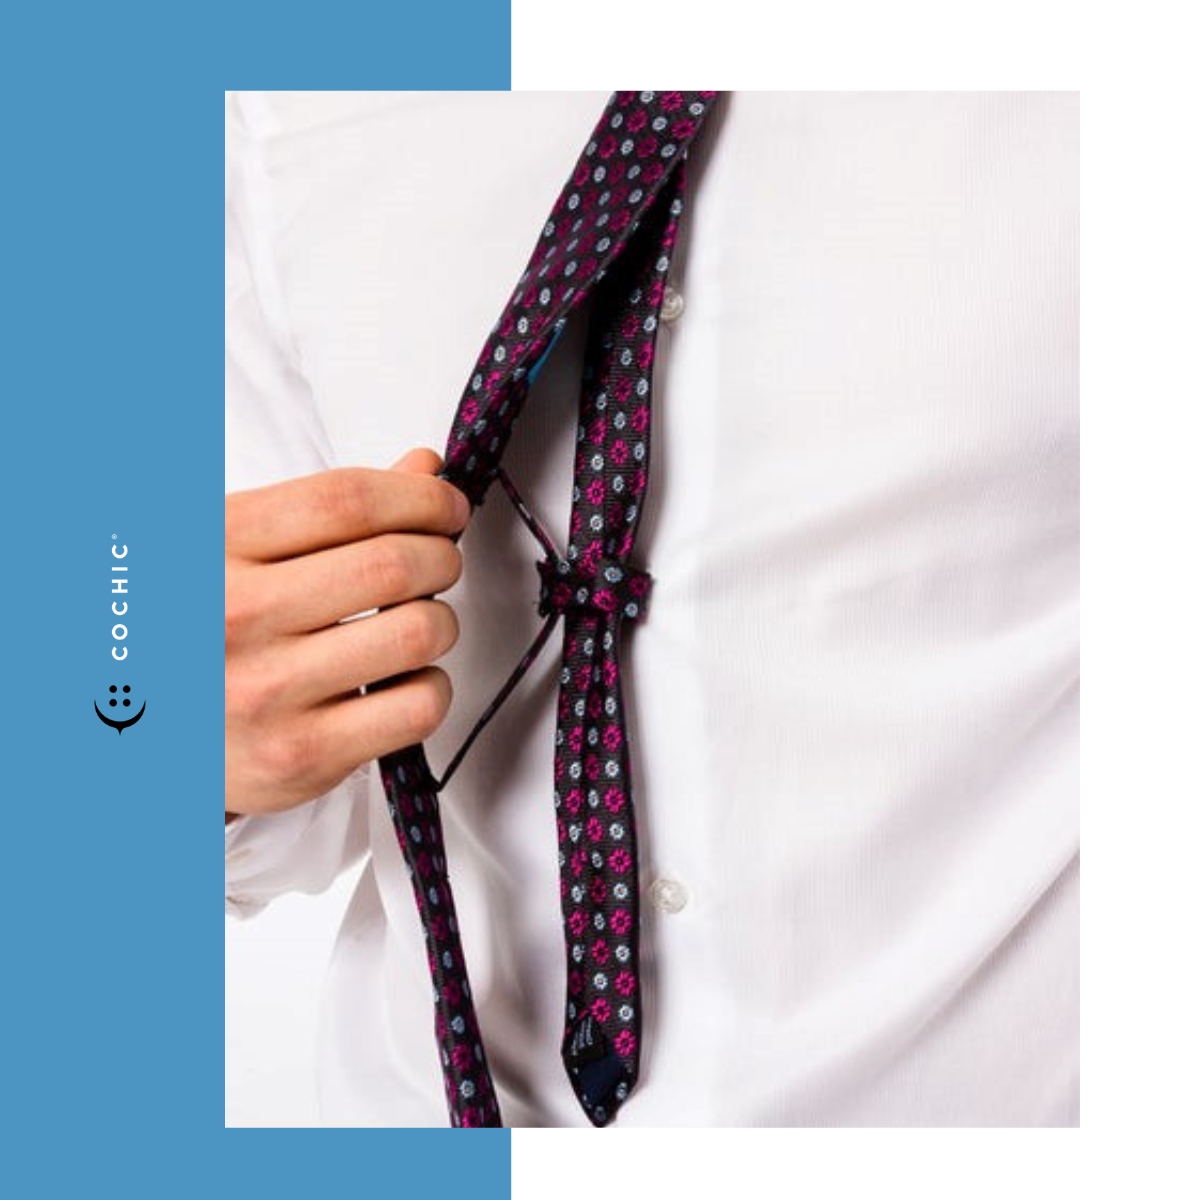 How is our Patented Tie different?